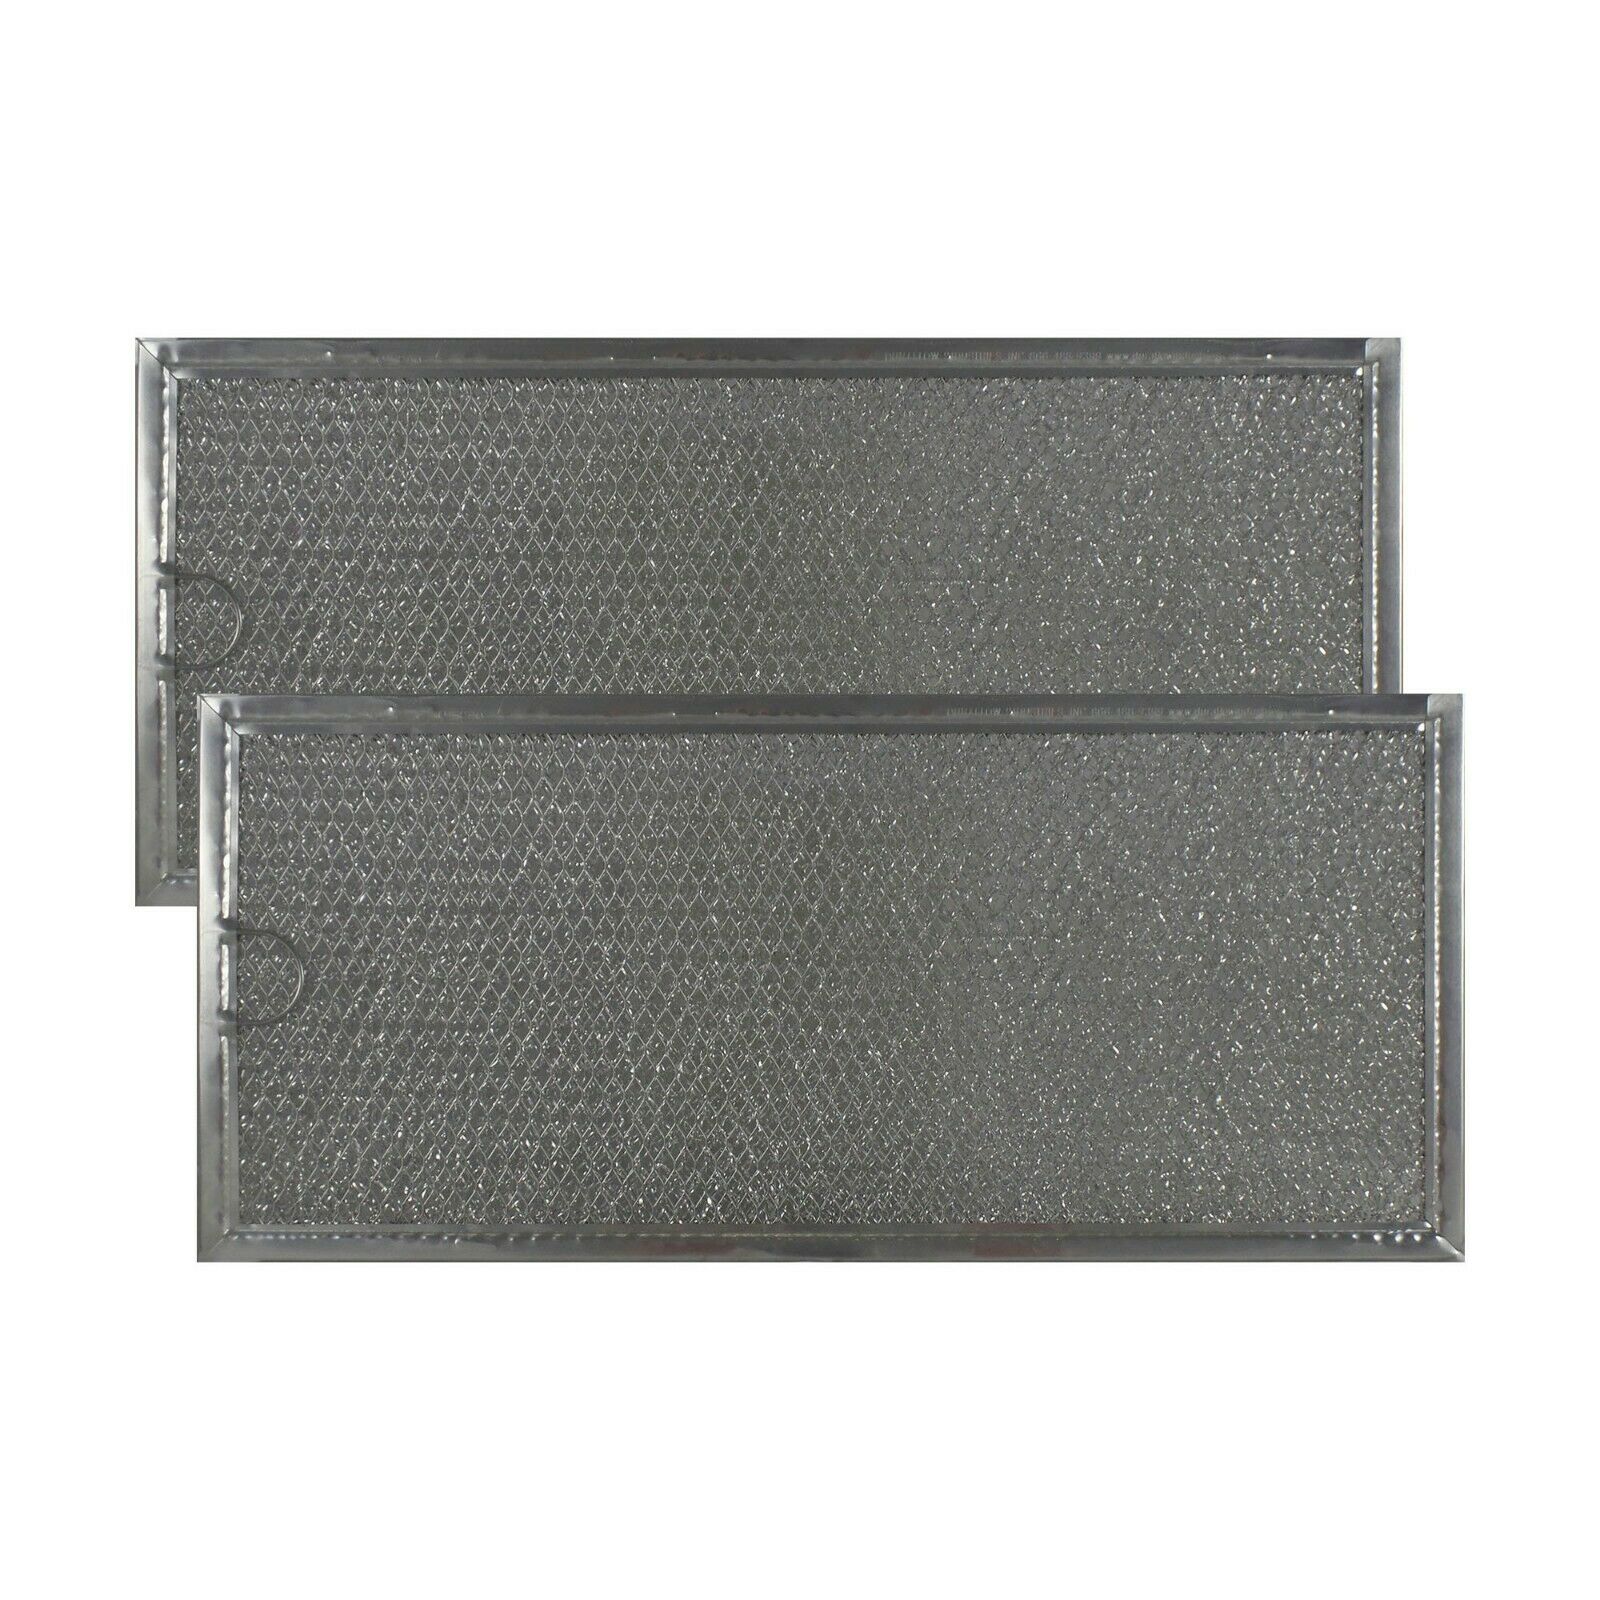 Compatible Ge Part # Wb06x10596 Aluminum Grease Microwave Oven Filters (2 Pack)